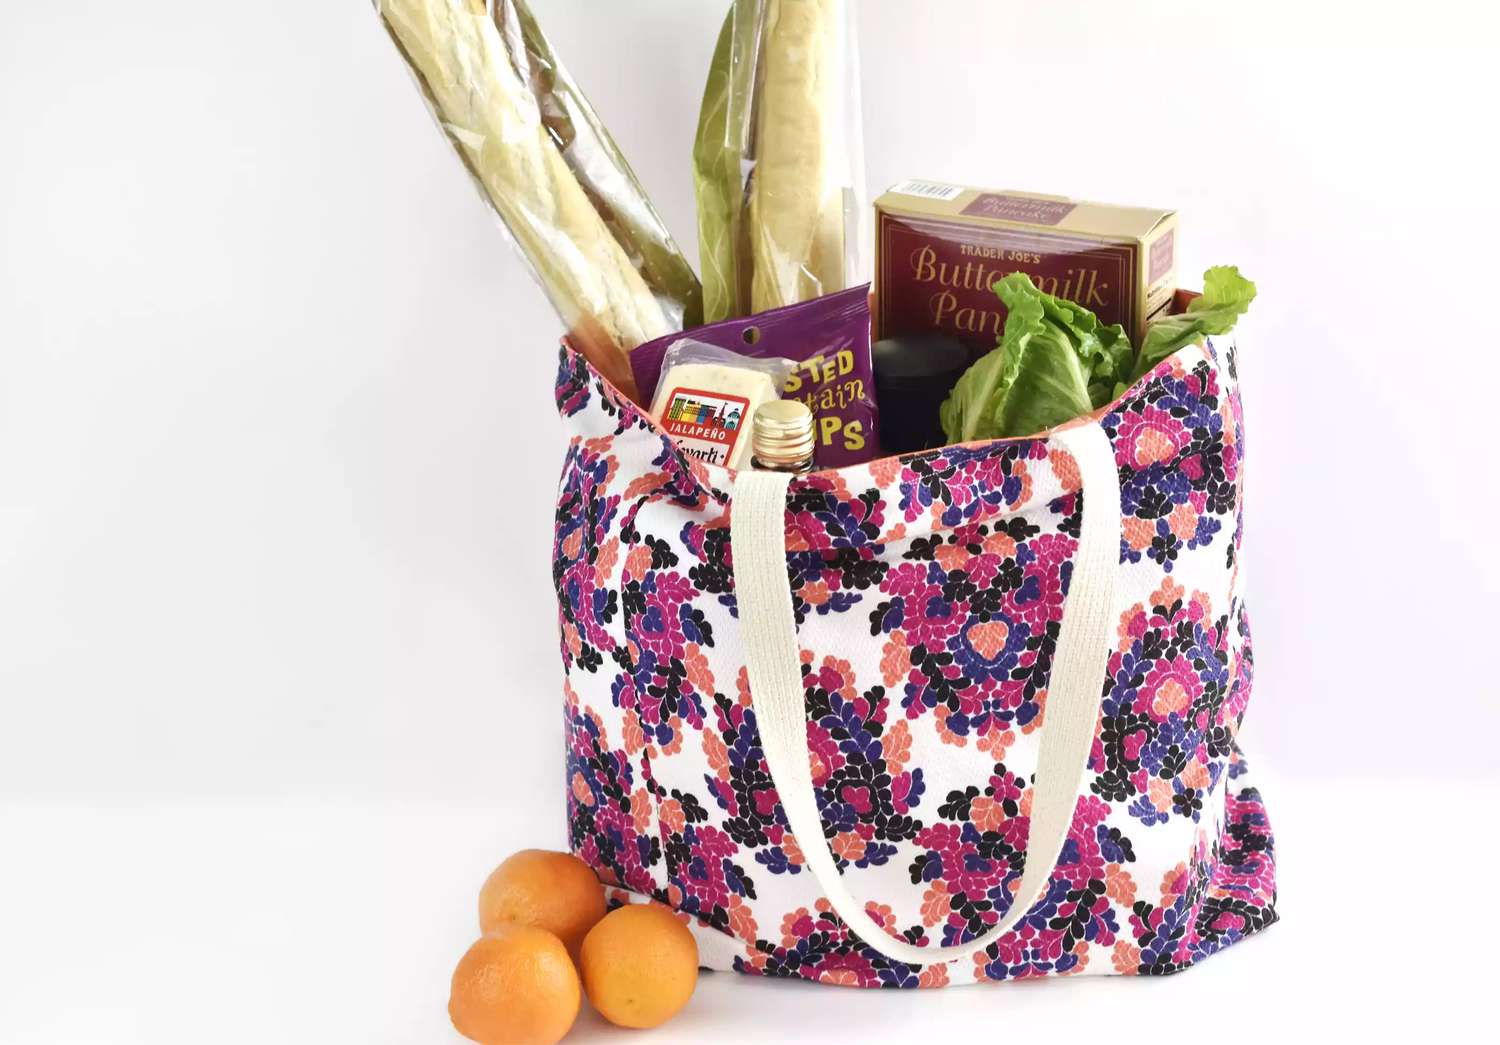 A purple floral reusable grocery bag filled with groceries